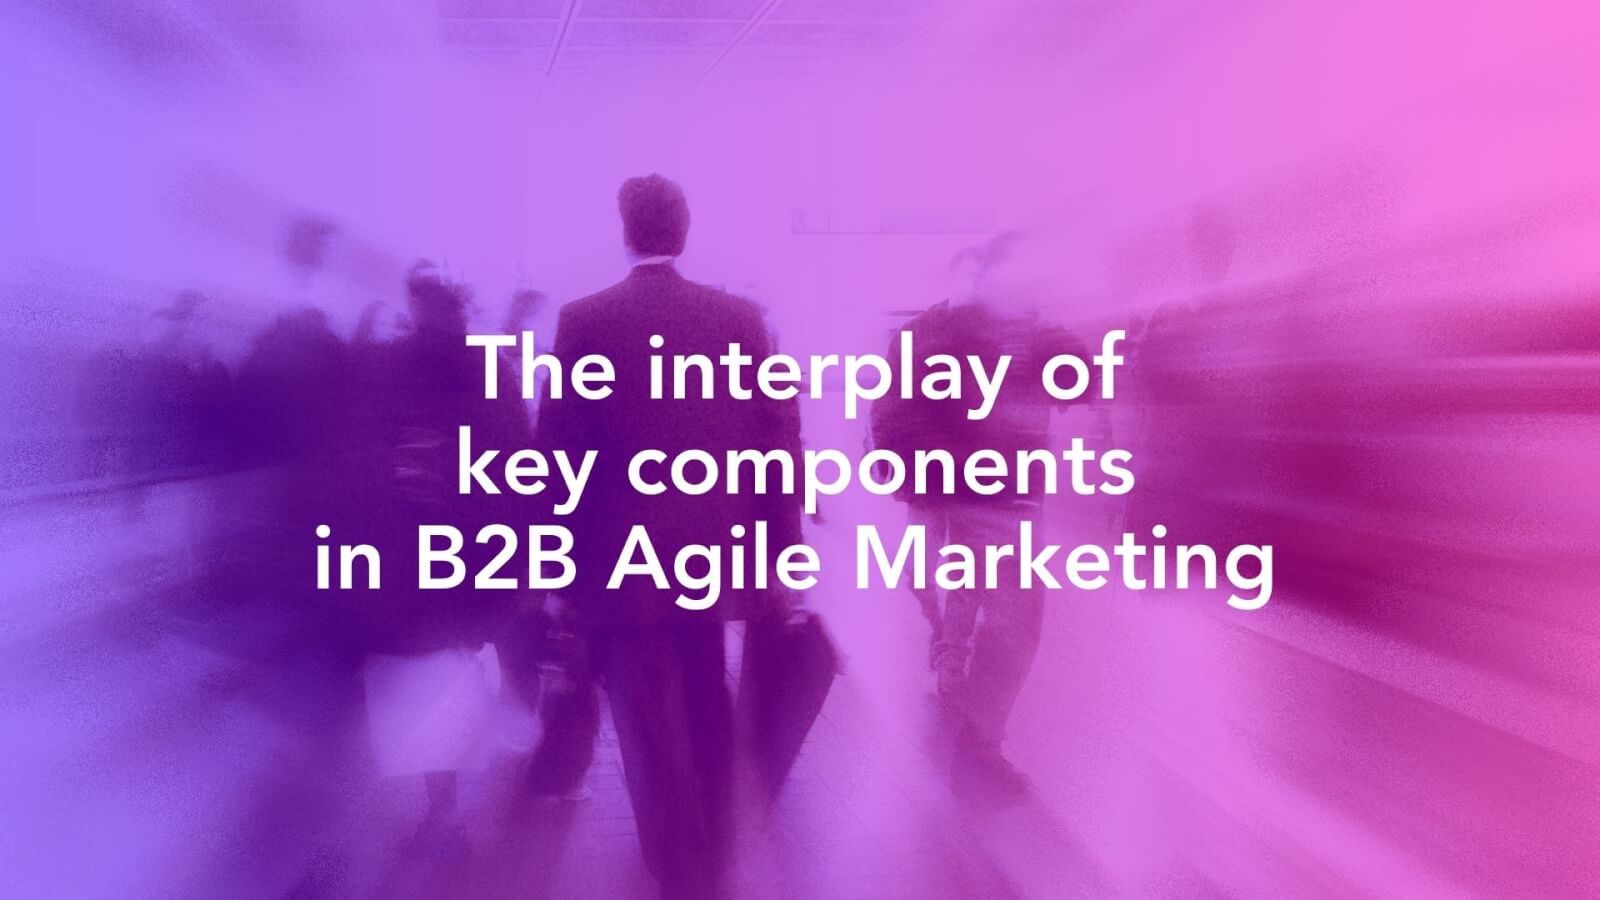 The interplay of key components in B2B Agile Marketing